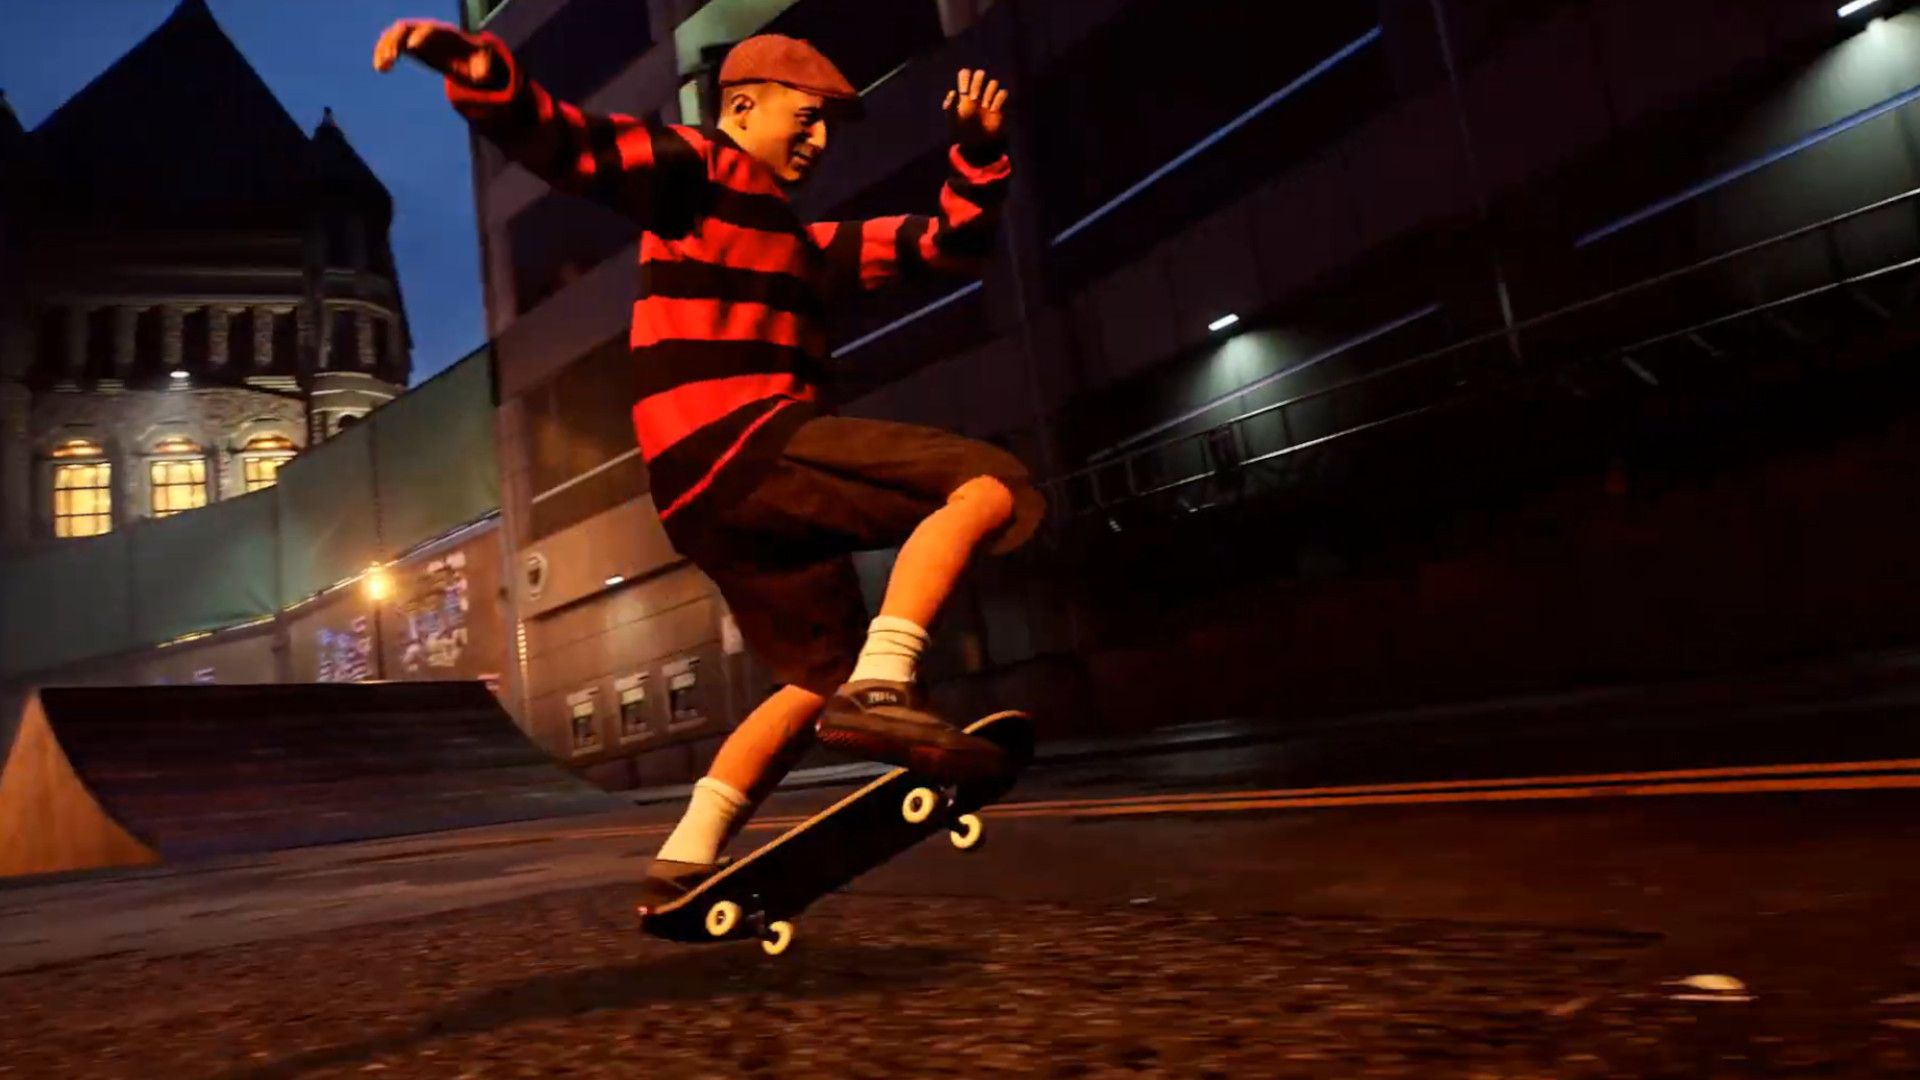 Tony Hawk's Pro Skater 1 and 2 are full remakes from the Crash Bandicoot trilogy devs